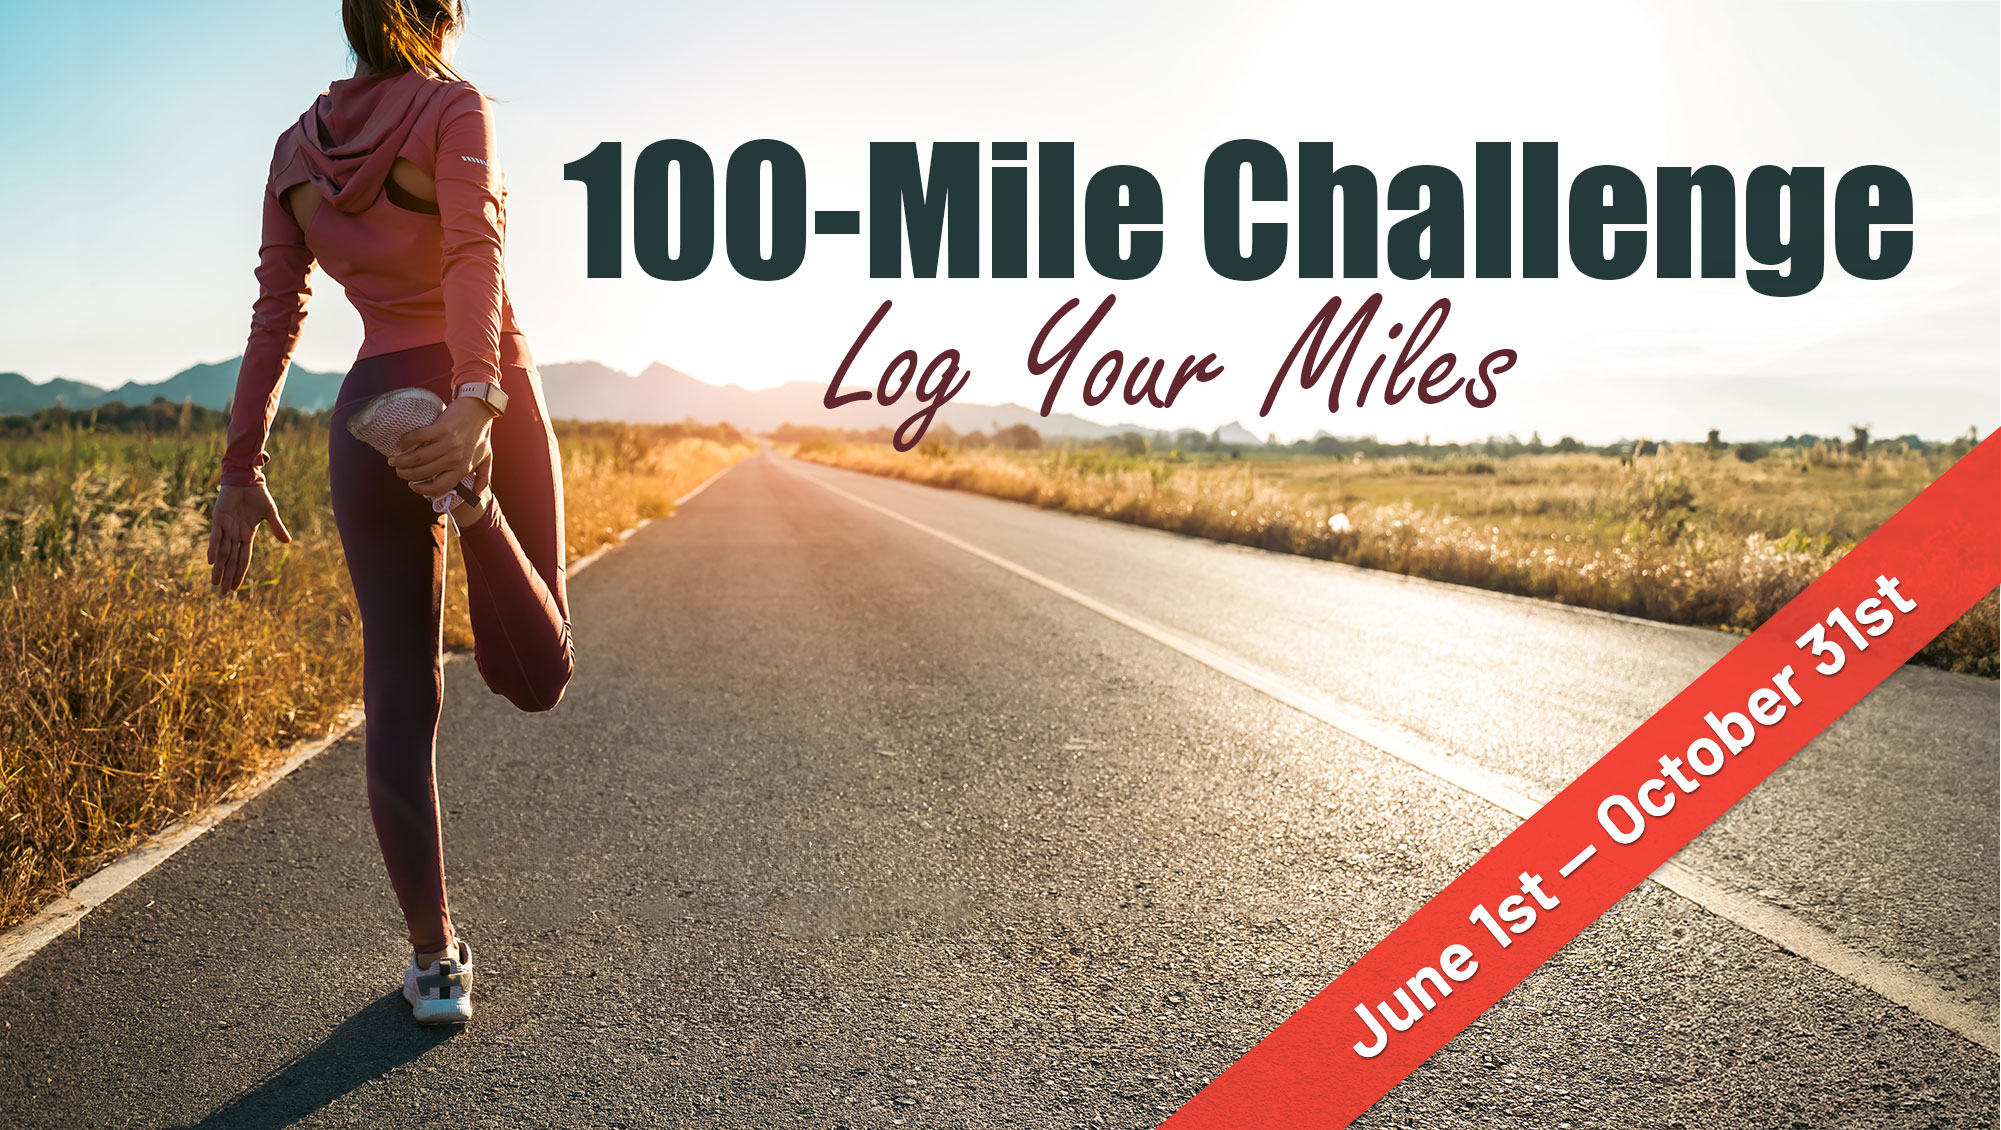 Log your miles for the 100 Mile Challenge!